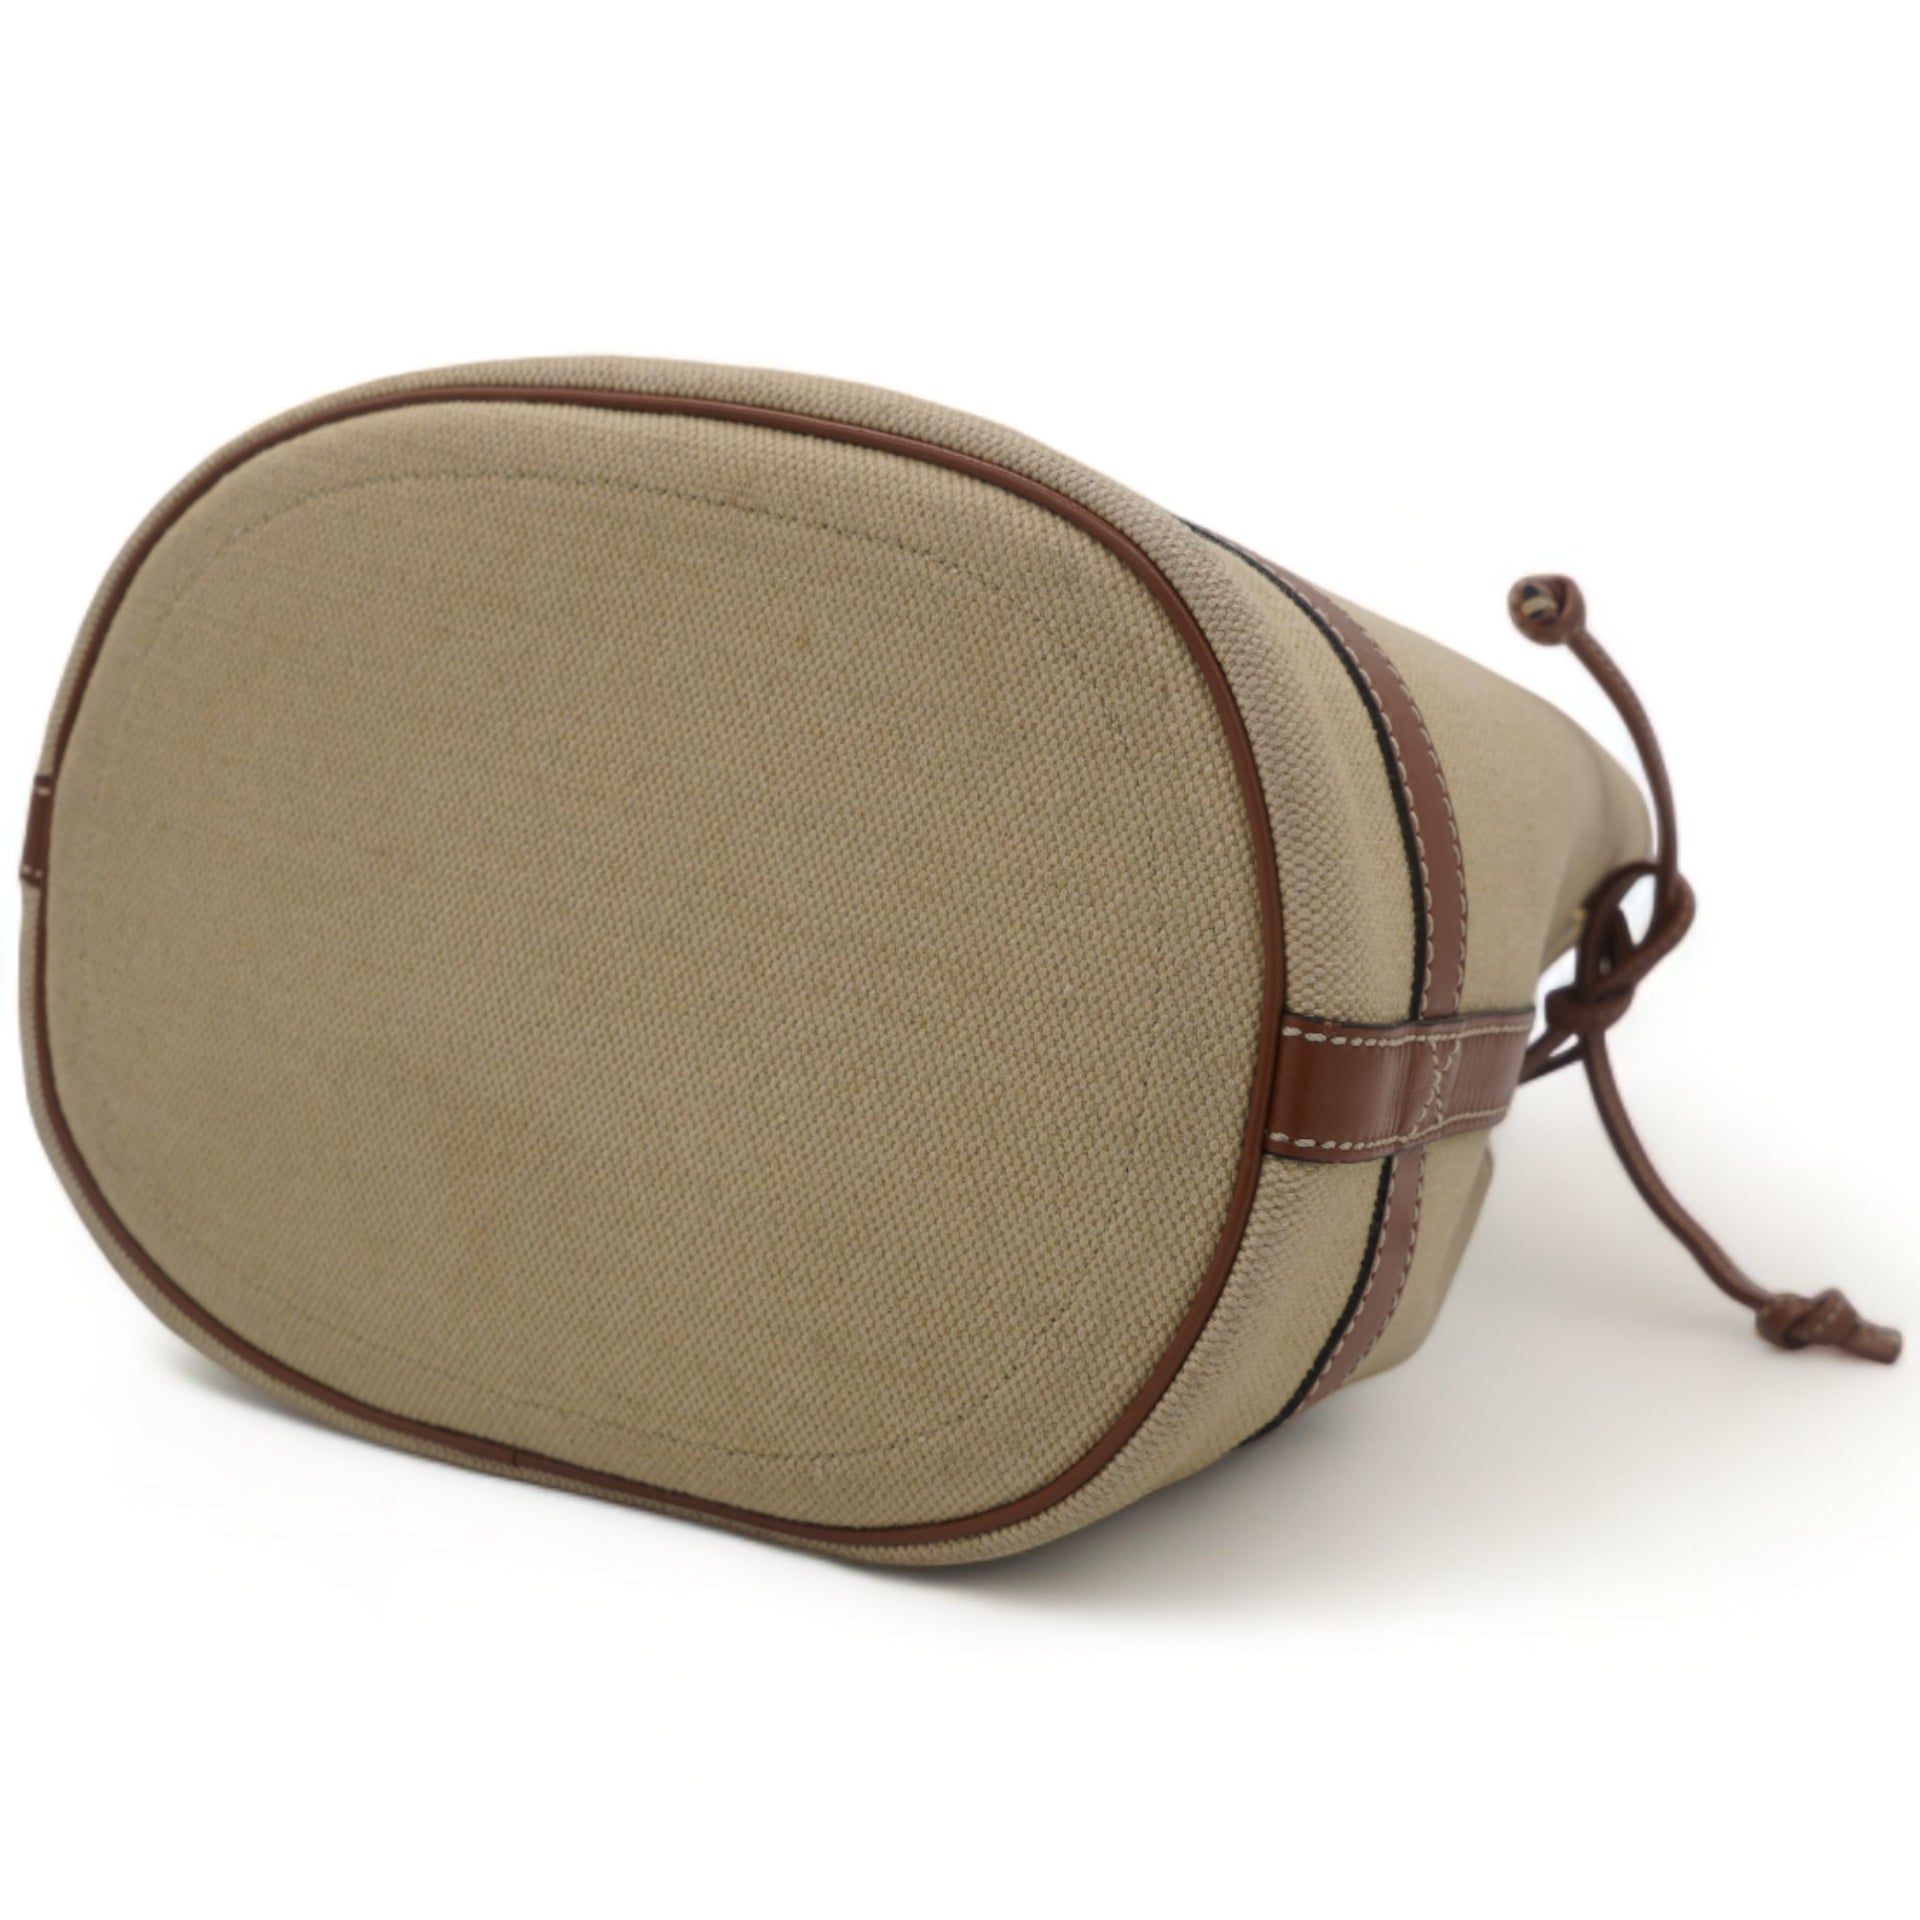 Seau Marin Drawstring Cabas in Beige Textile and Tan Leather